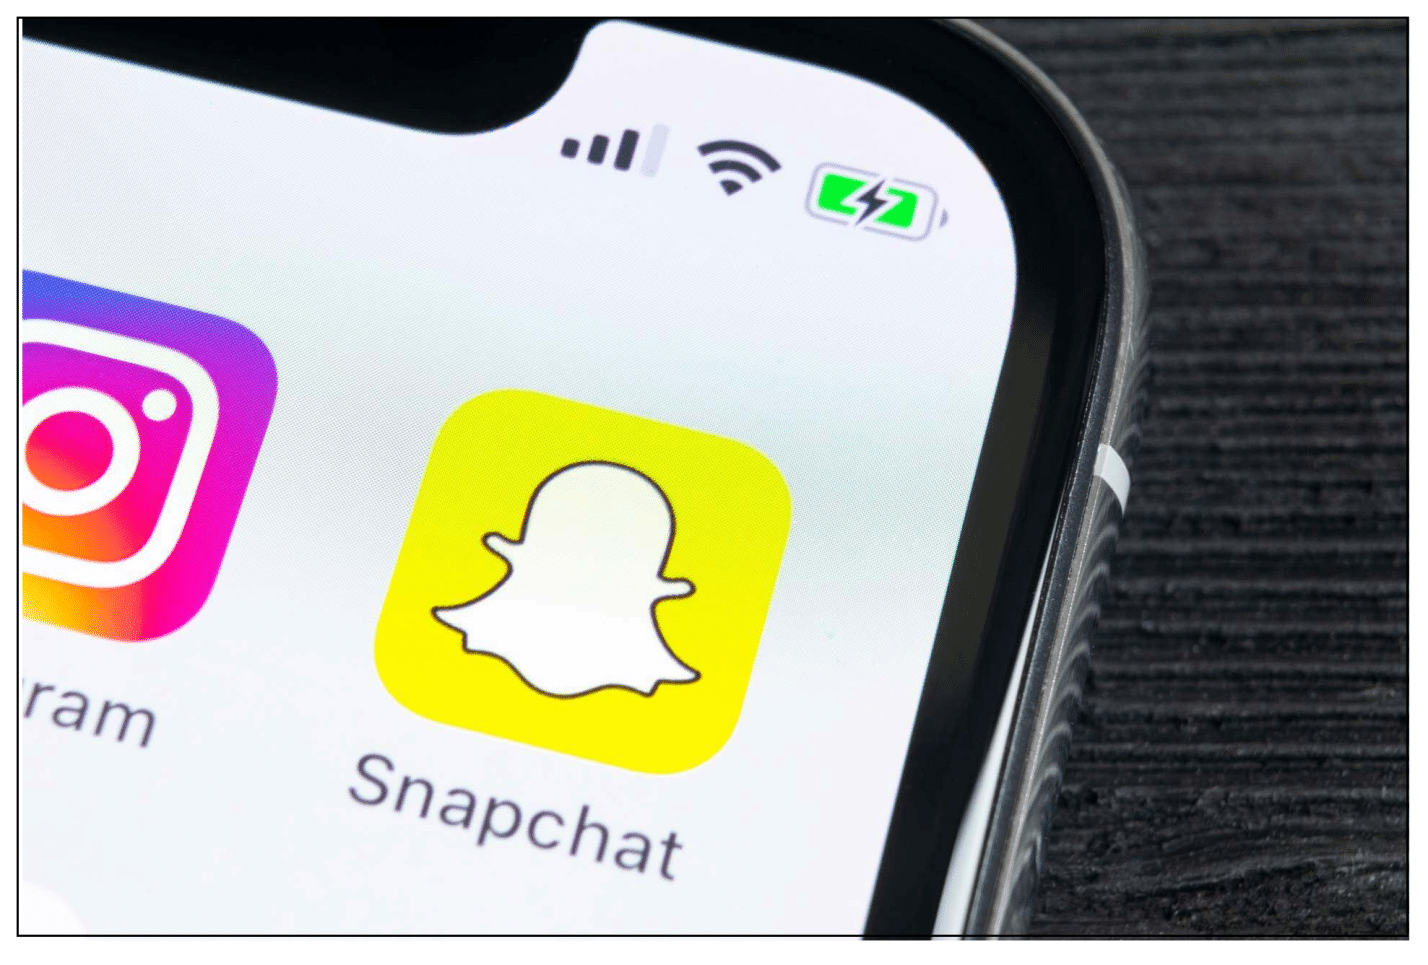 launch the Snapchat app